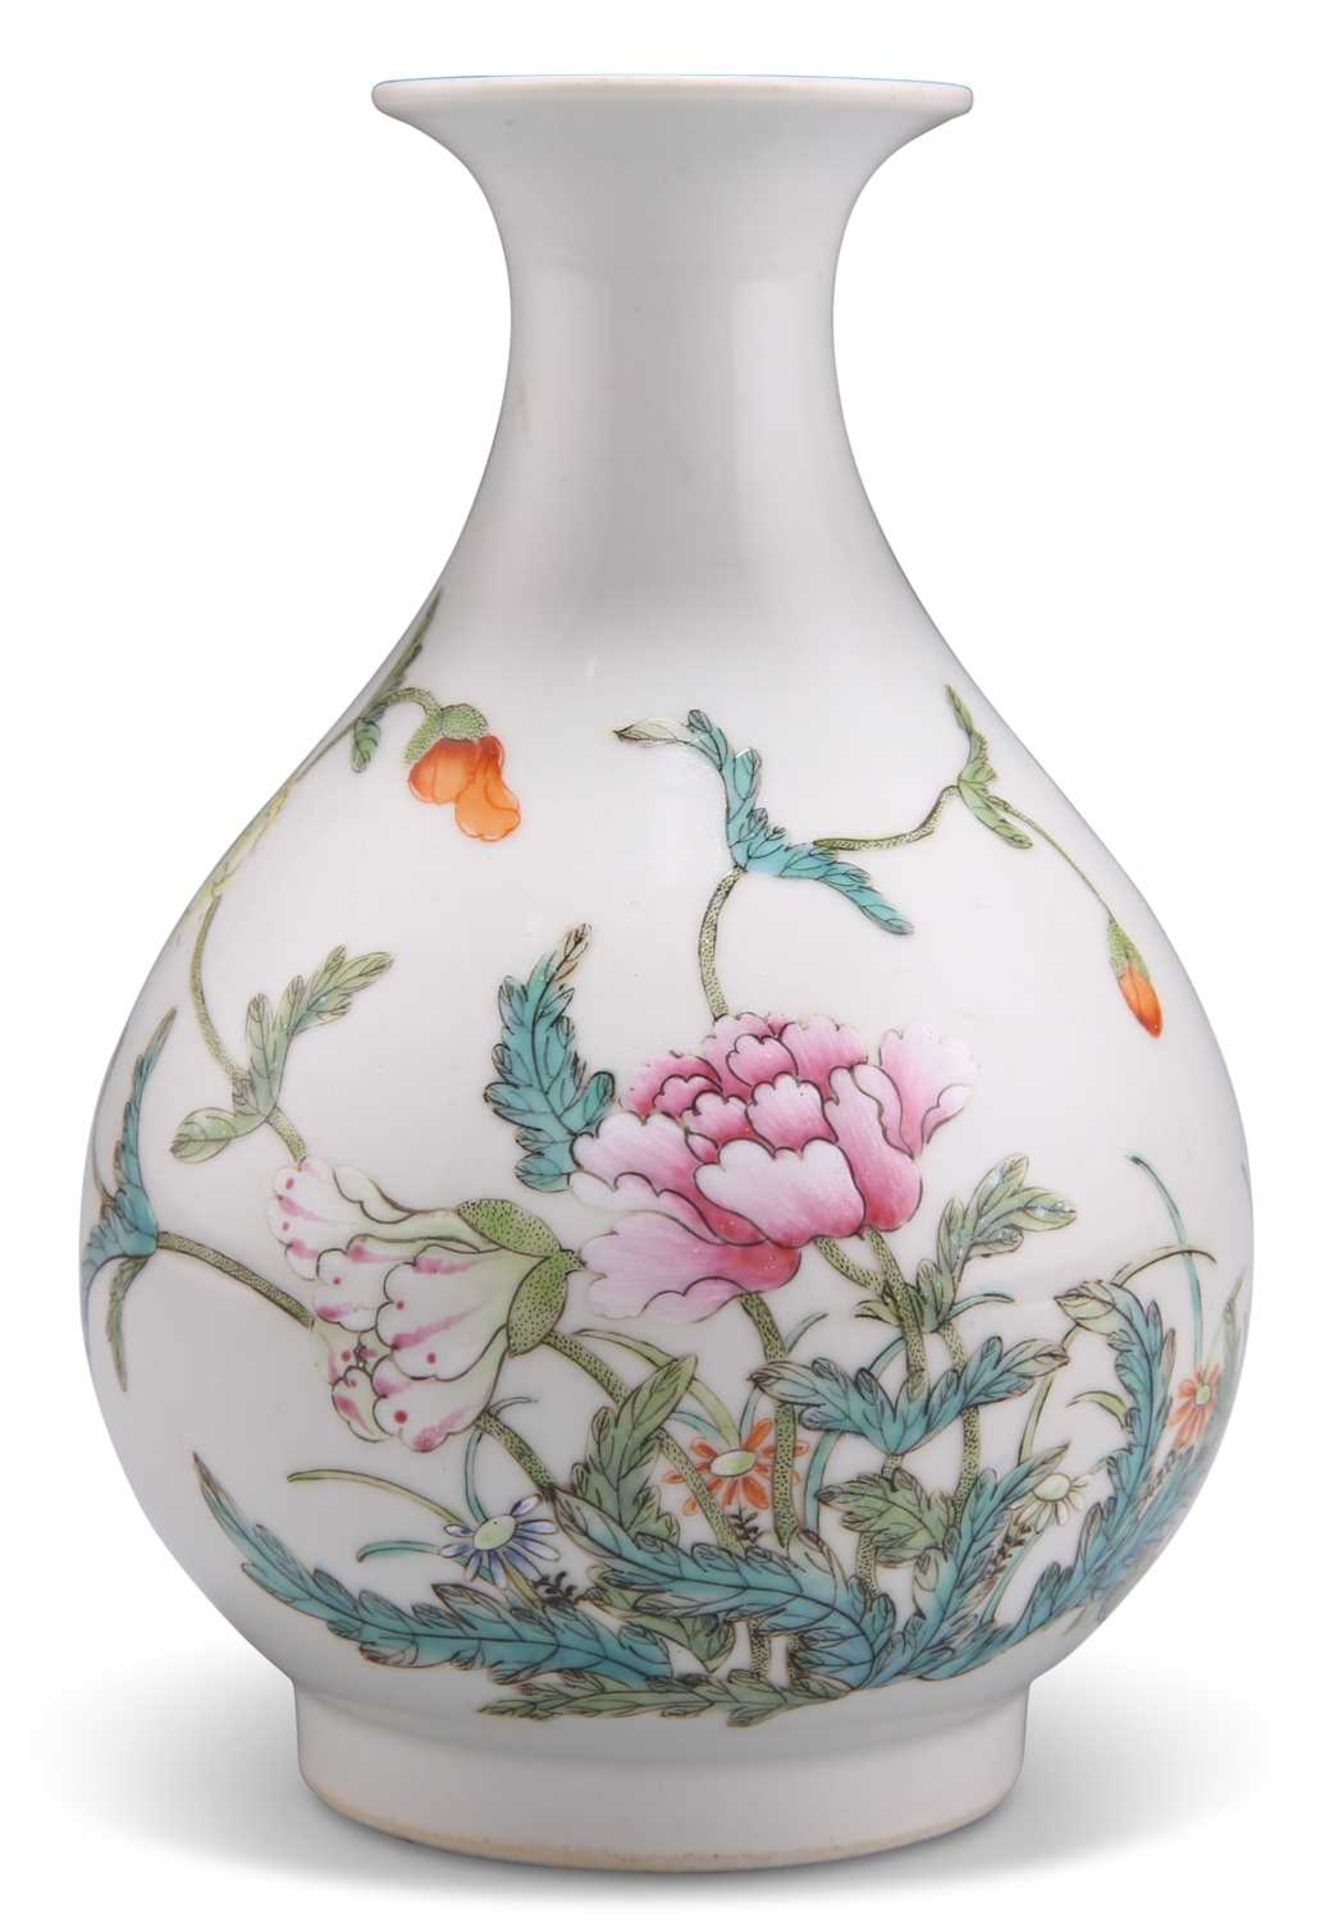 A CHINESE FAMILLE ROSE 'FLOWER' VASE, YUHUCHUNPING